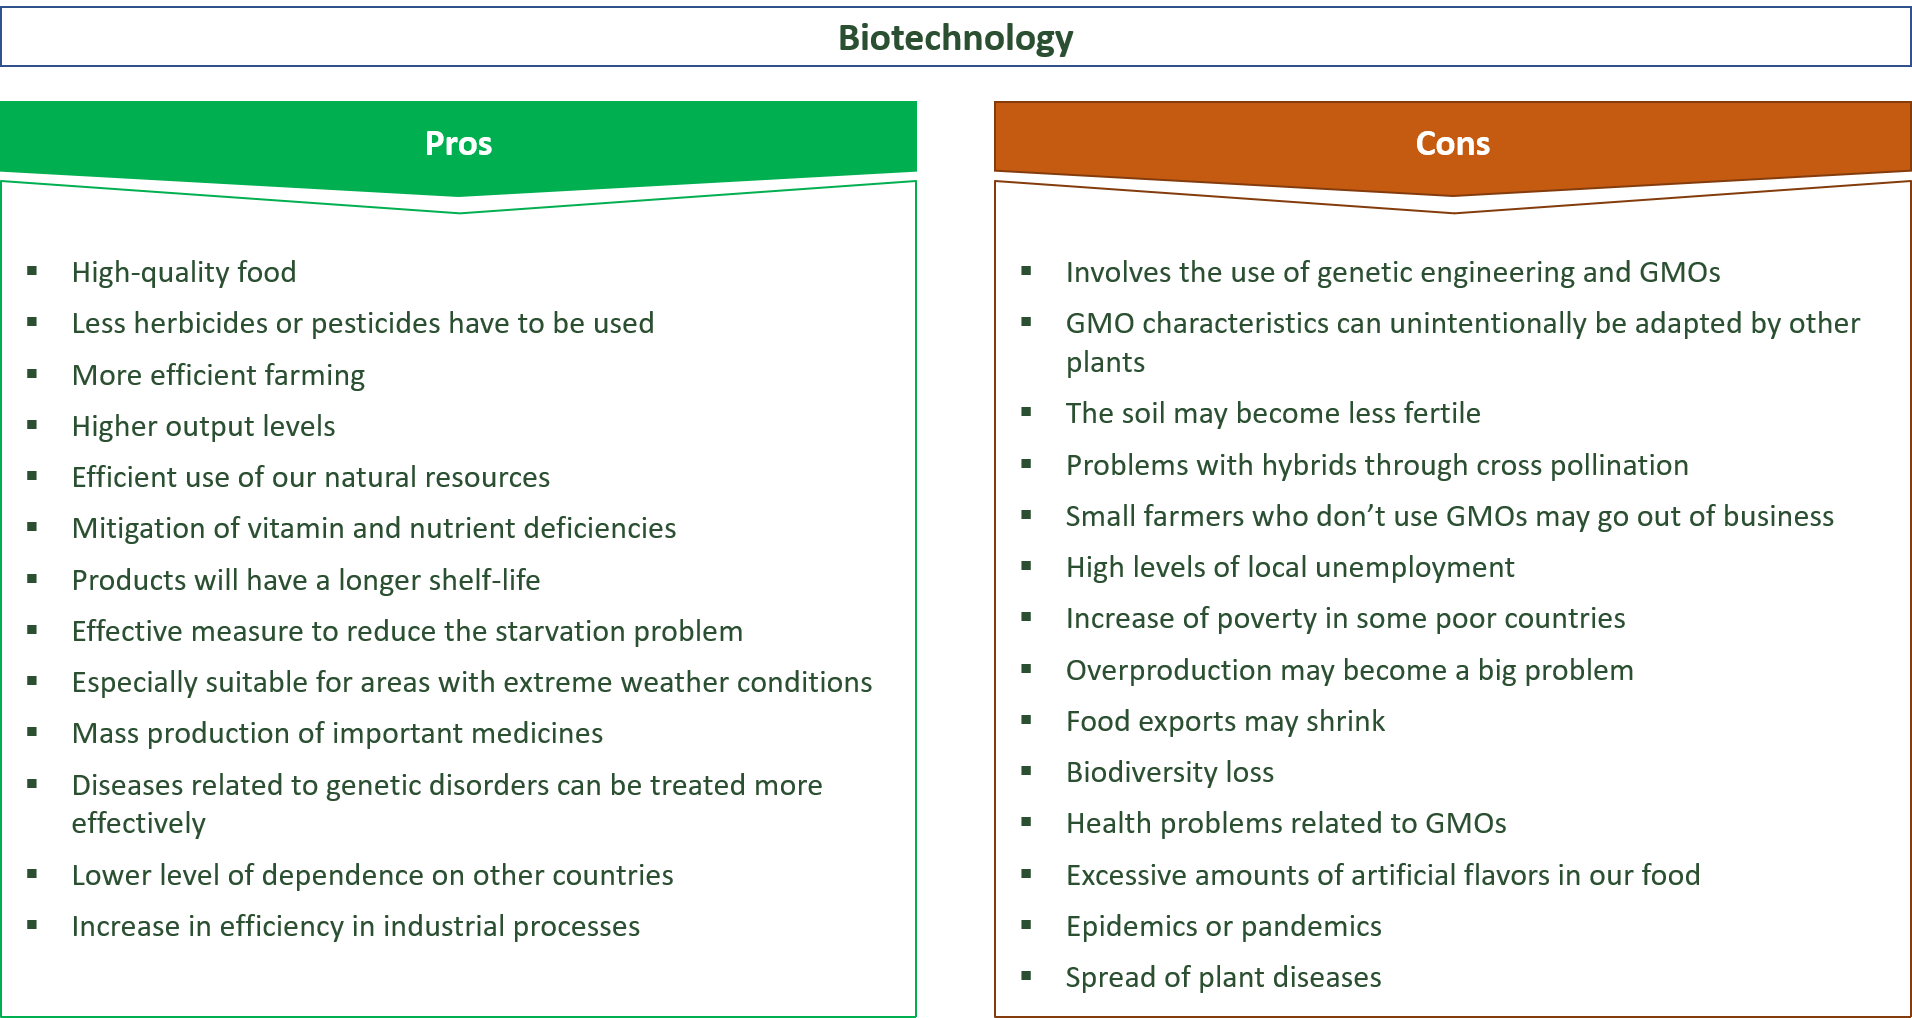 34 Main Pros & Cons Of Biotechnology - E&C